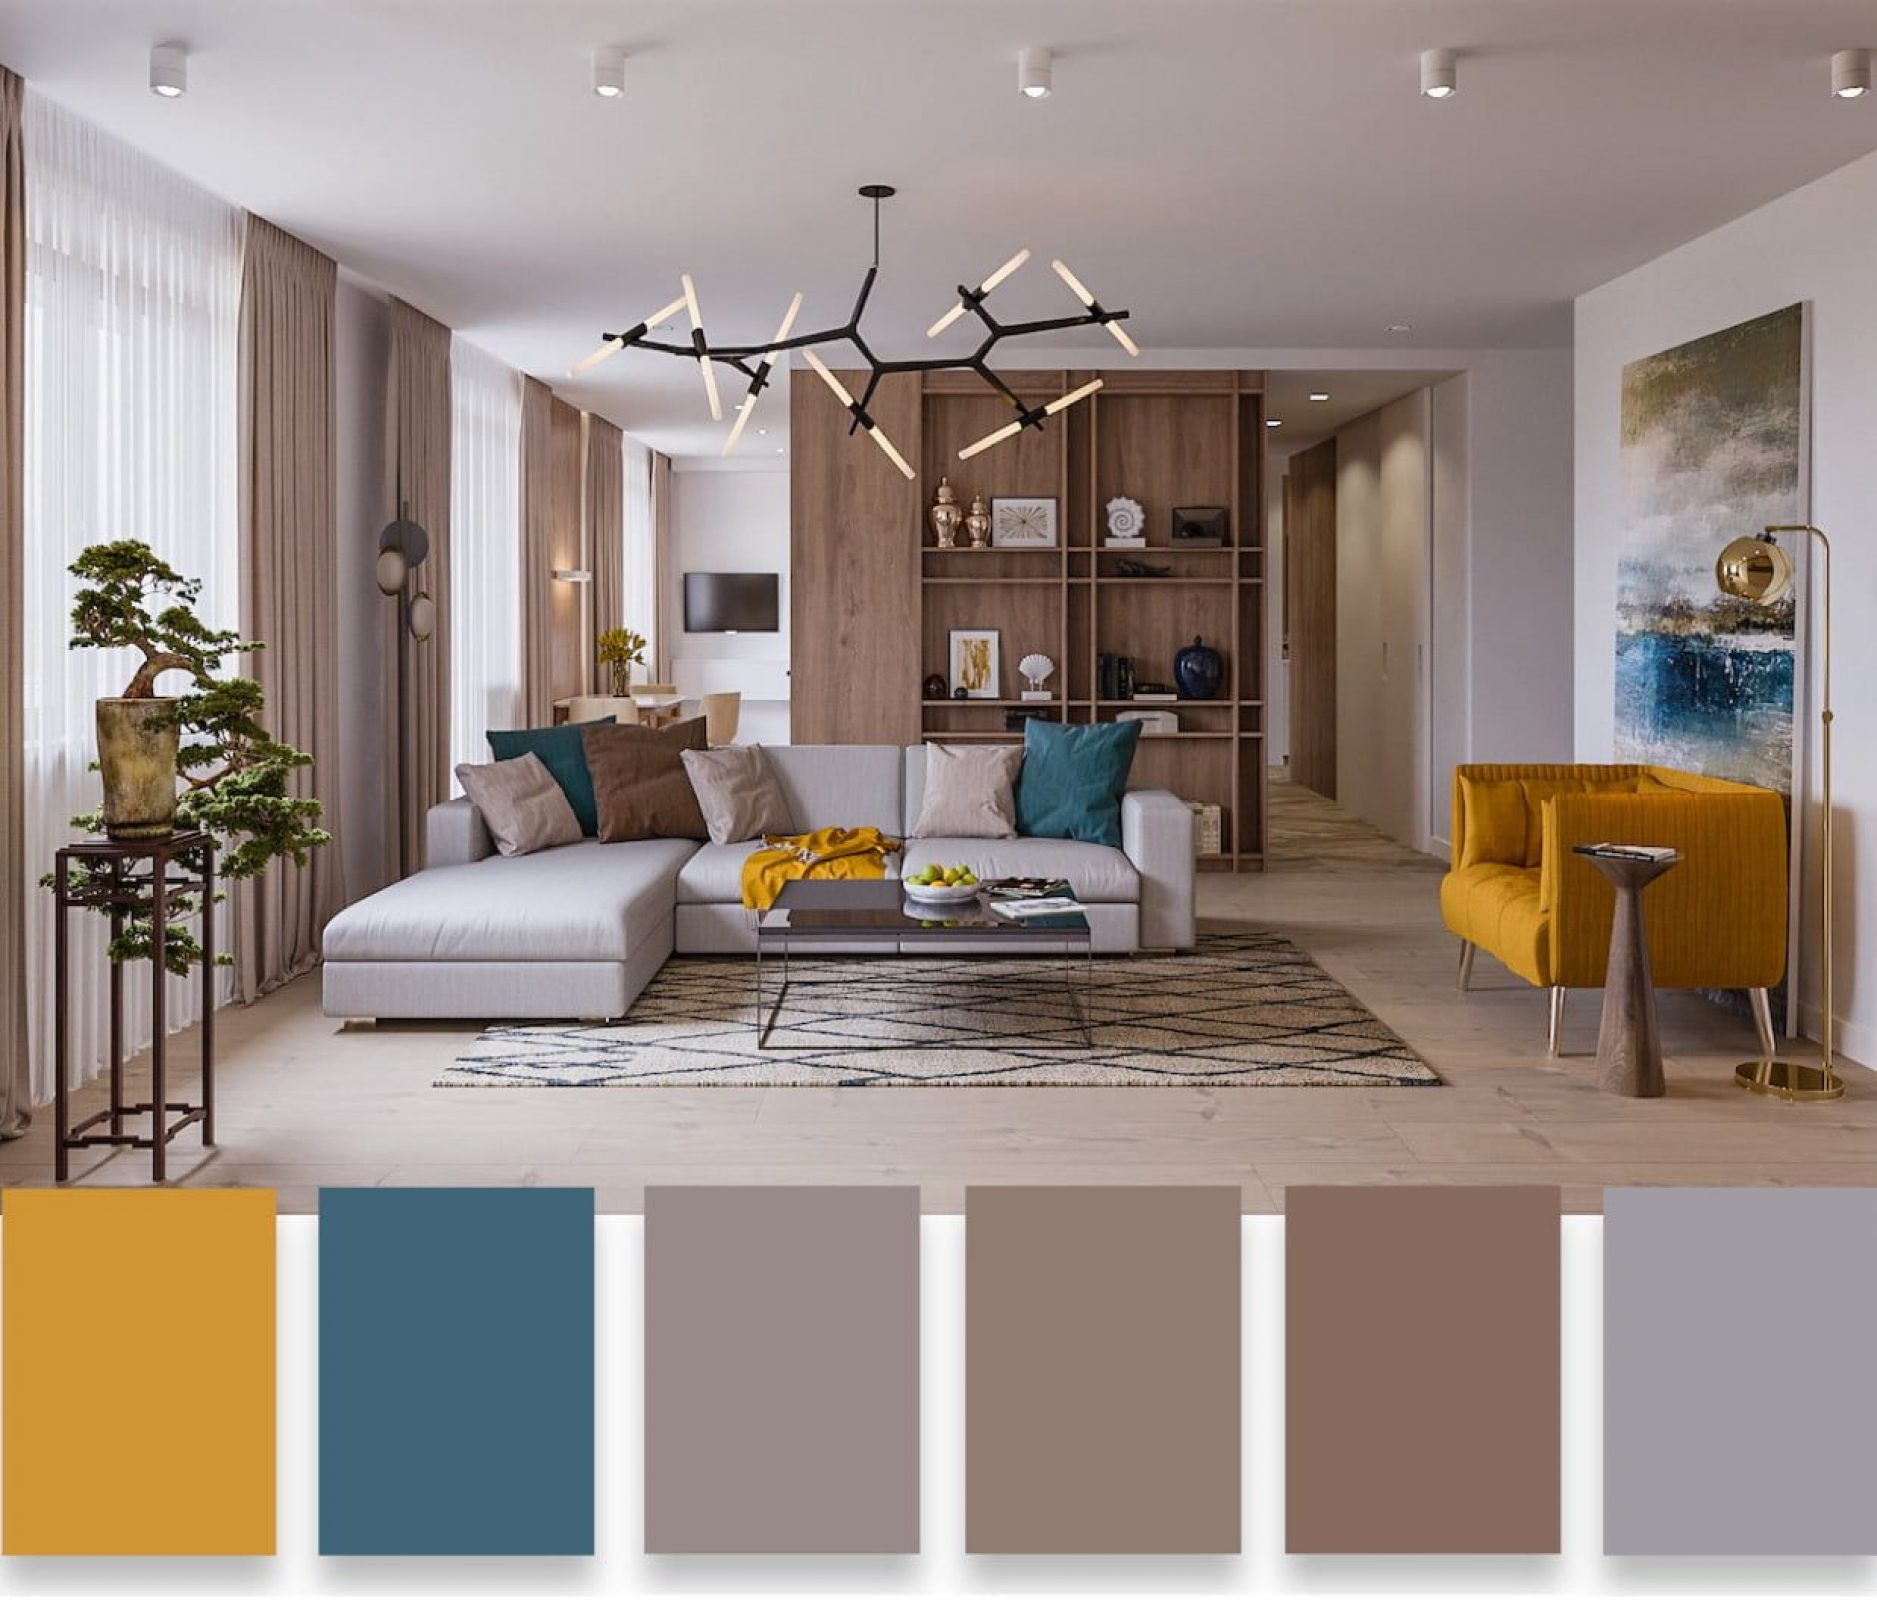 12 Color Trends in 2023 That Will Dominate Interior DesignFrom